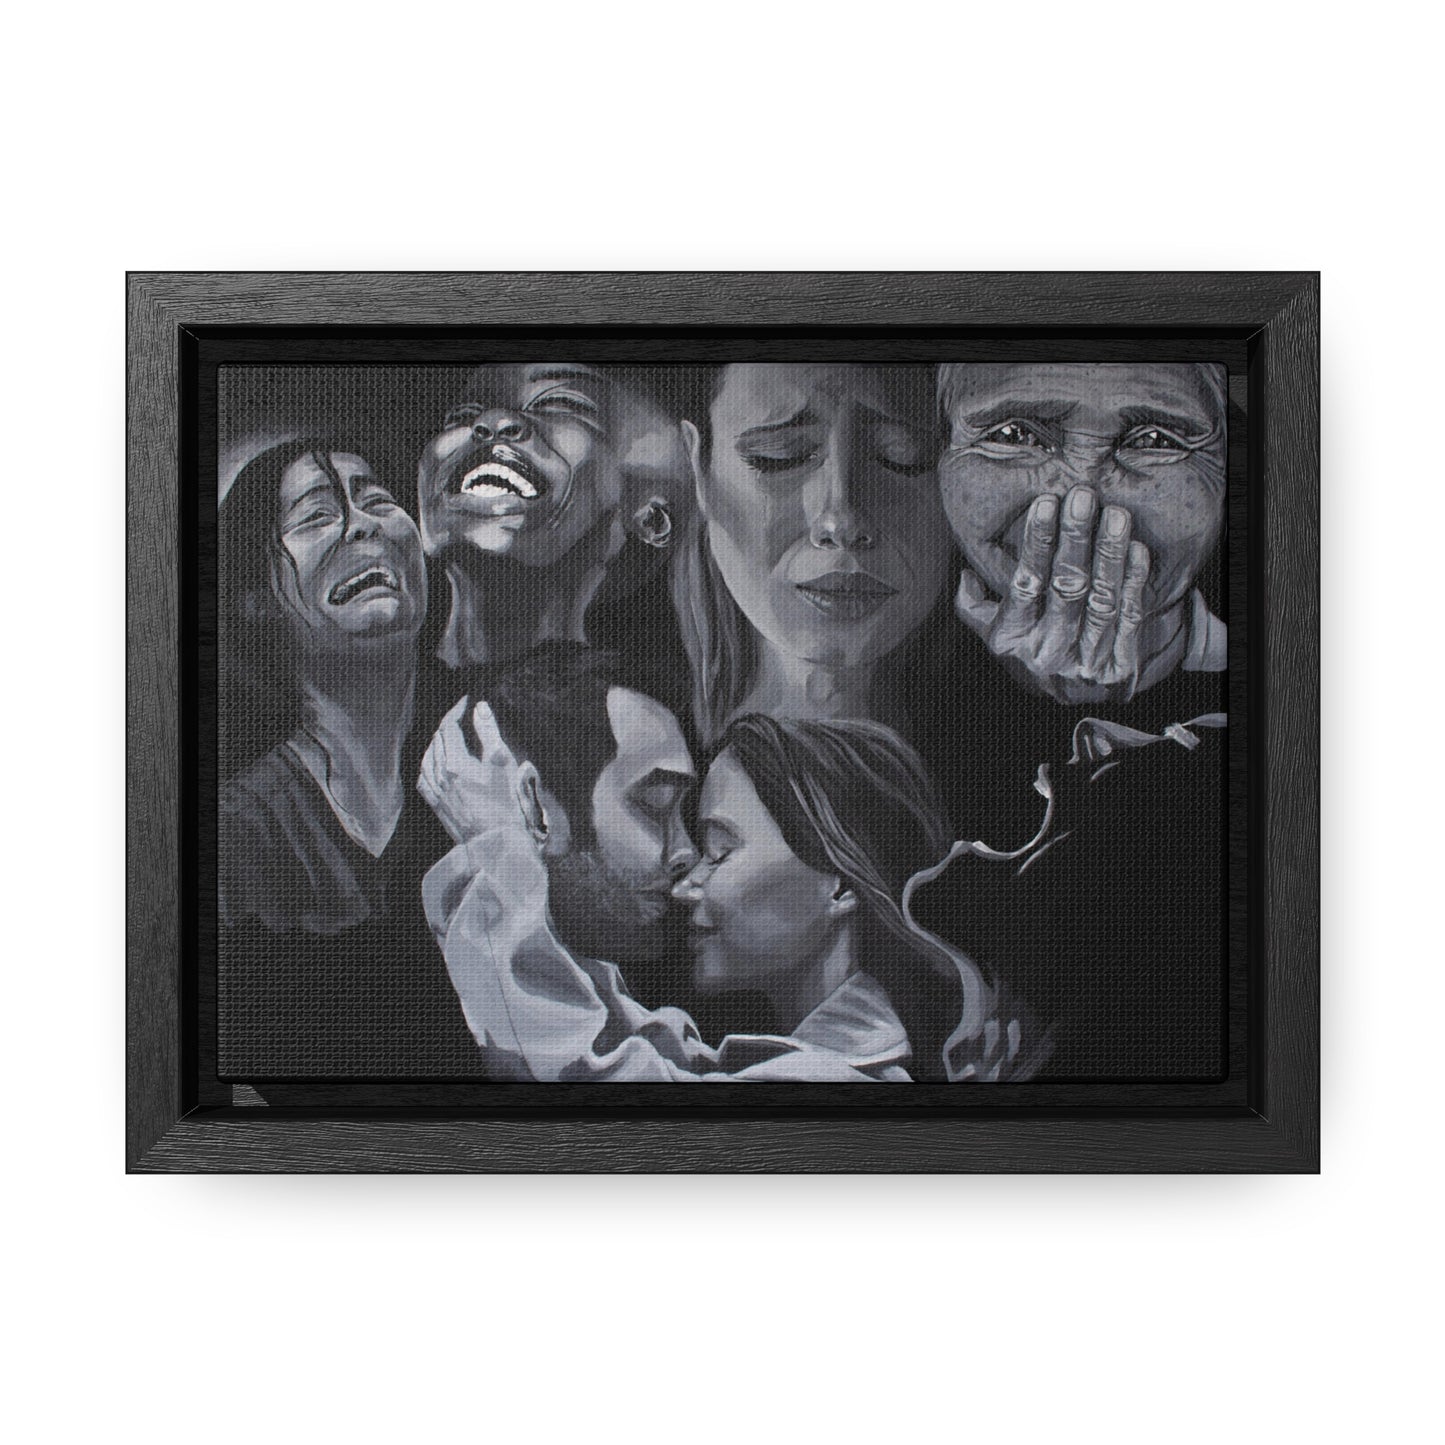 Acrylic Painting Print "Emotions" on Gallery Canvas Wraps, Horizontal Frame